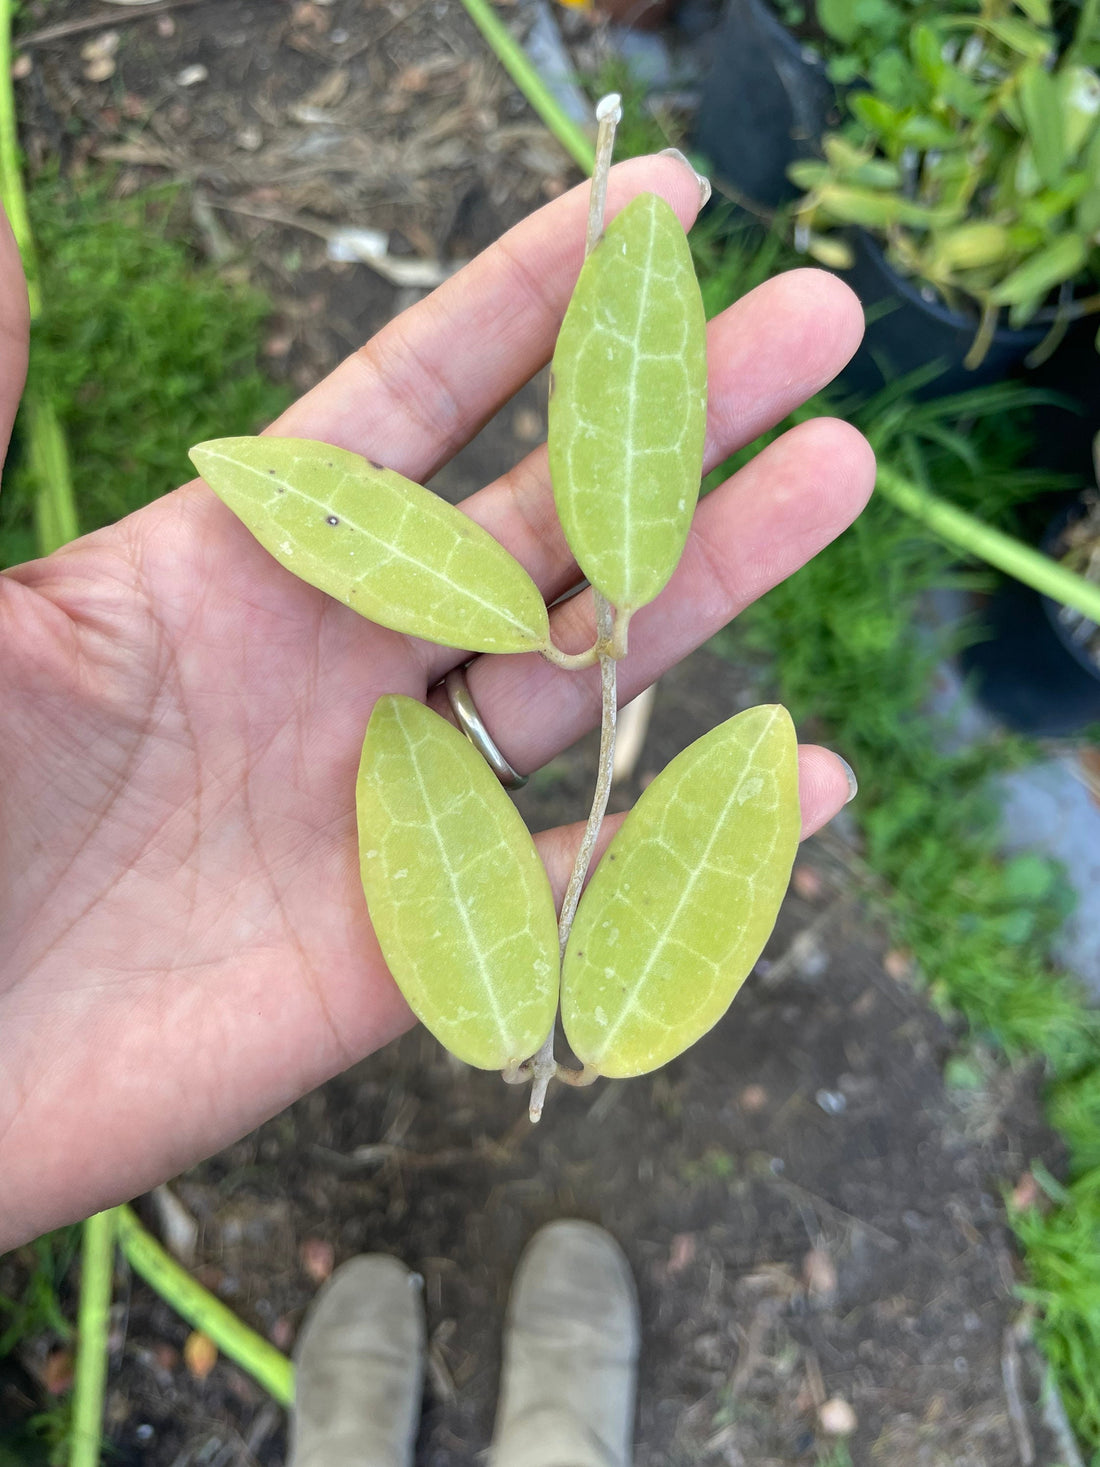 2 nodes  unrooted cutting -Please know how to  root cuttings Hoya Eliptica - no refunds-each cutting is unique